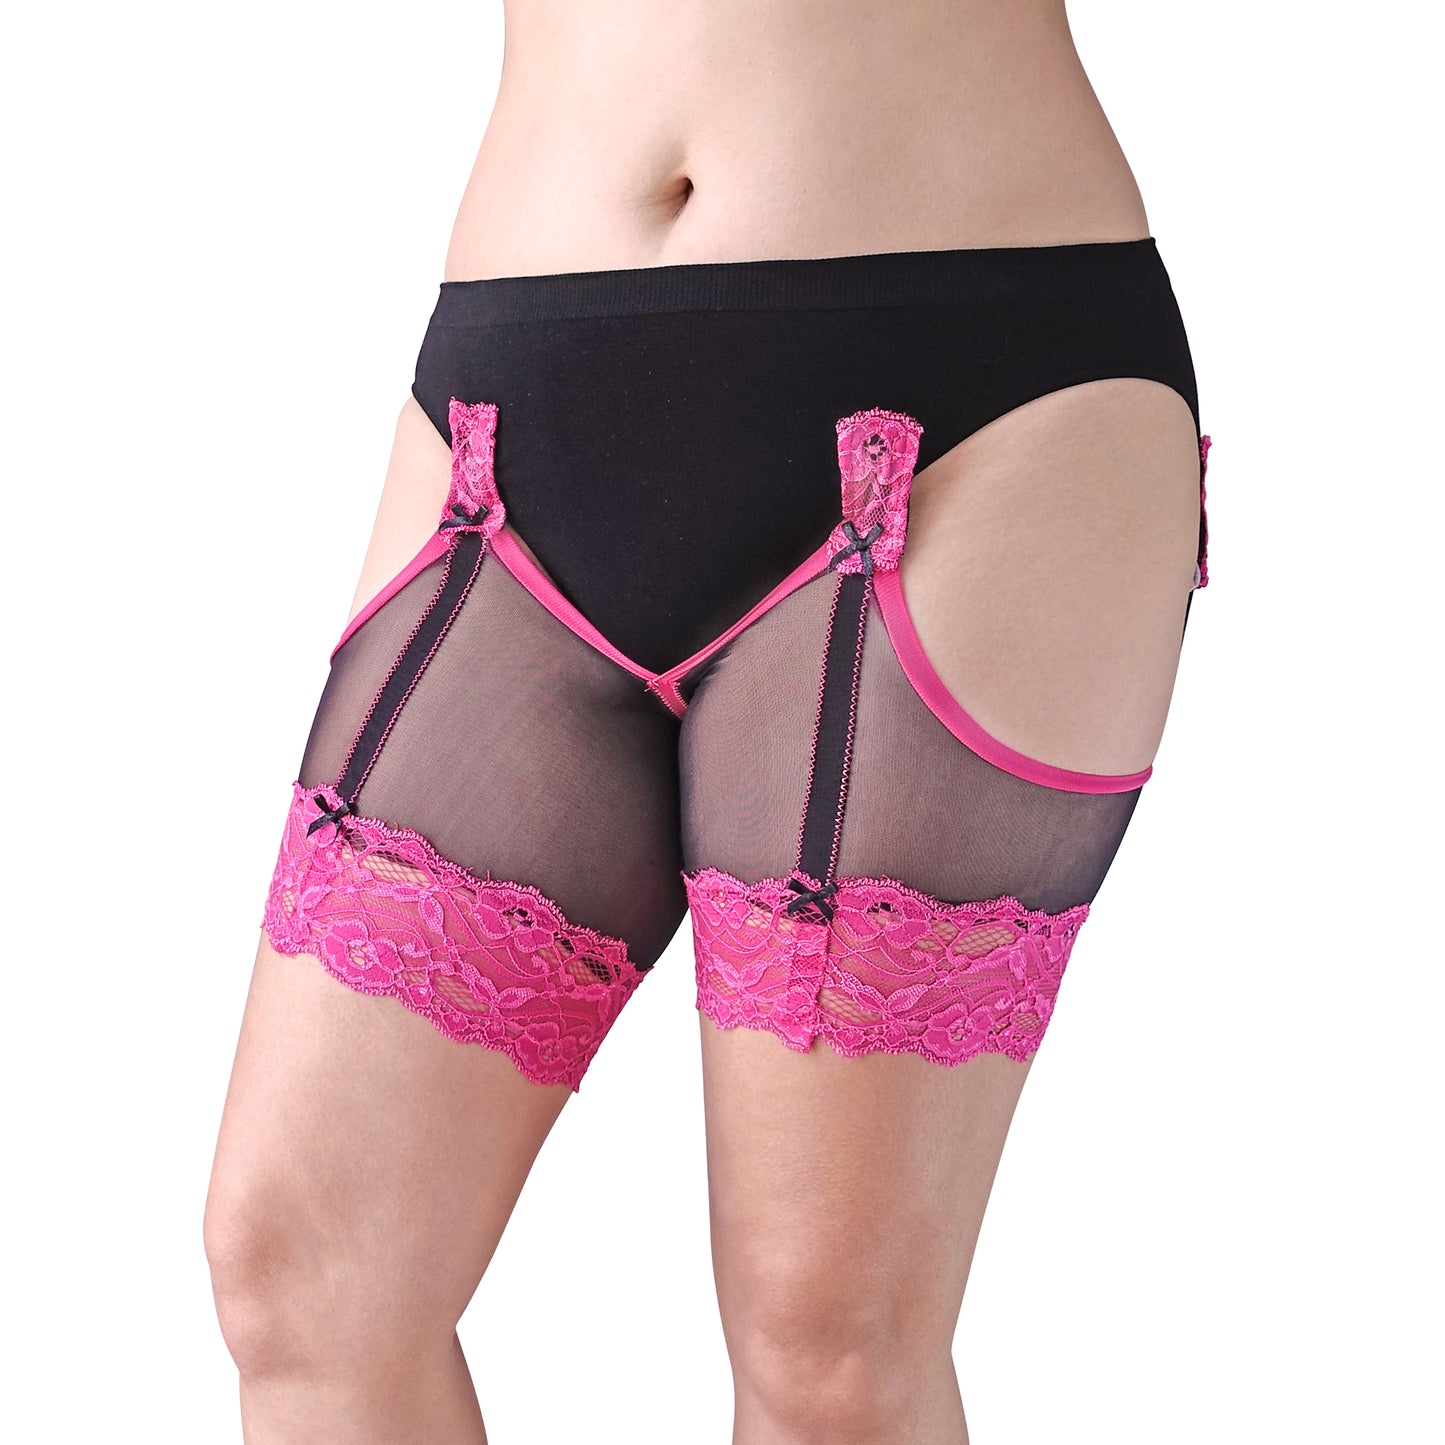 ANTI CHAFE Clip-On Thigh Bands - HOT PINK